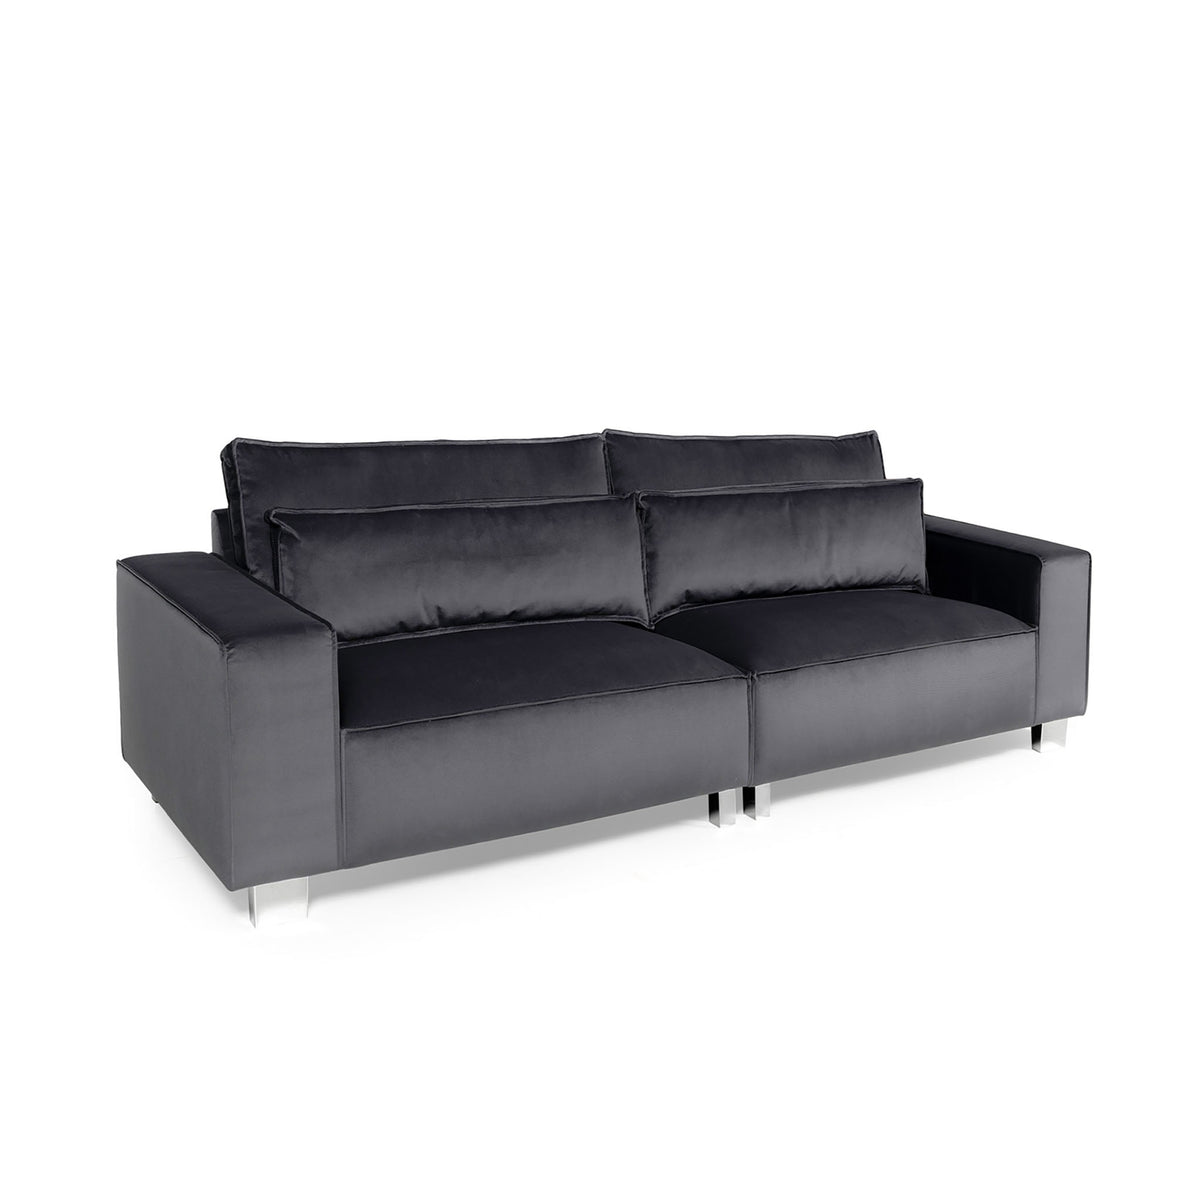 Sloane Luxe Chenille Charcoal 2 Seat Sofa  by Roseland Furniture